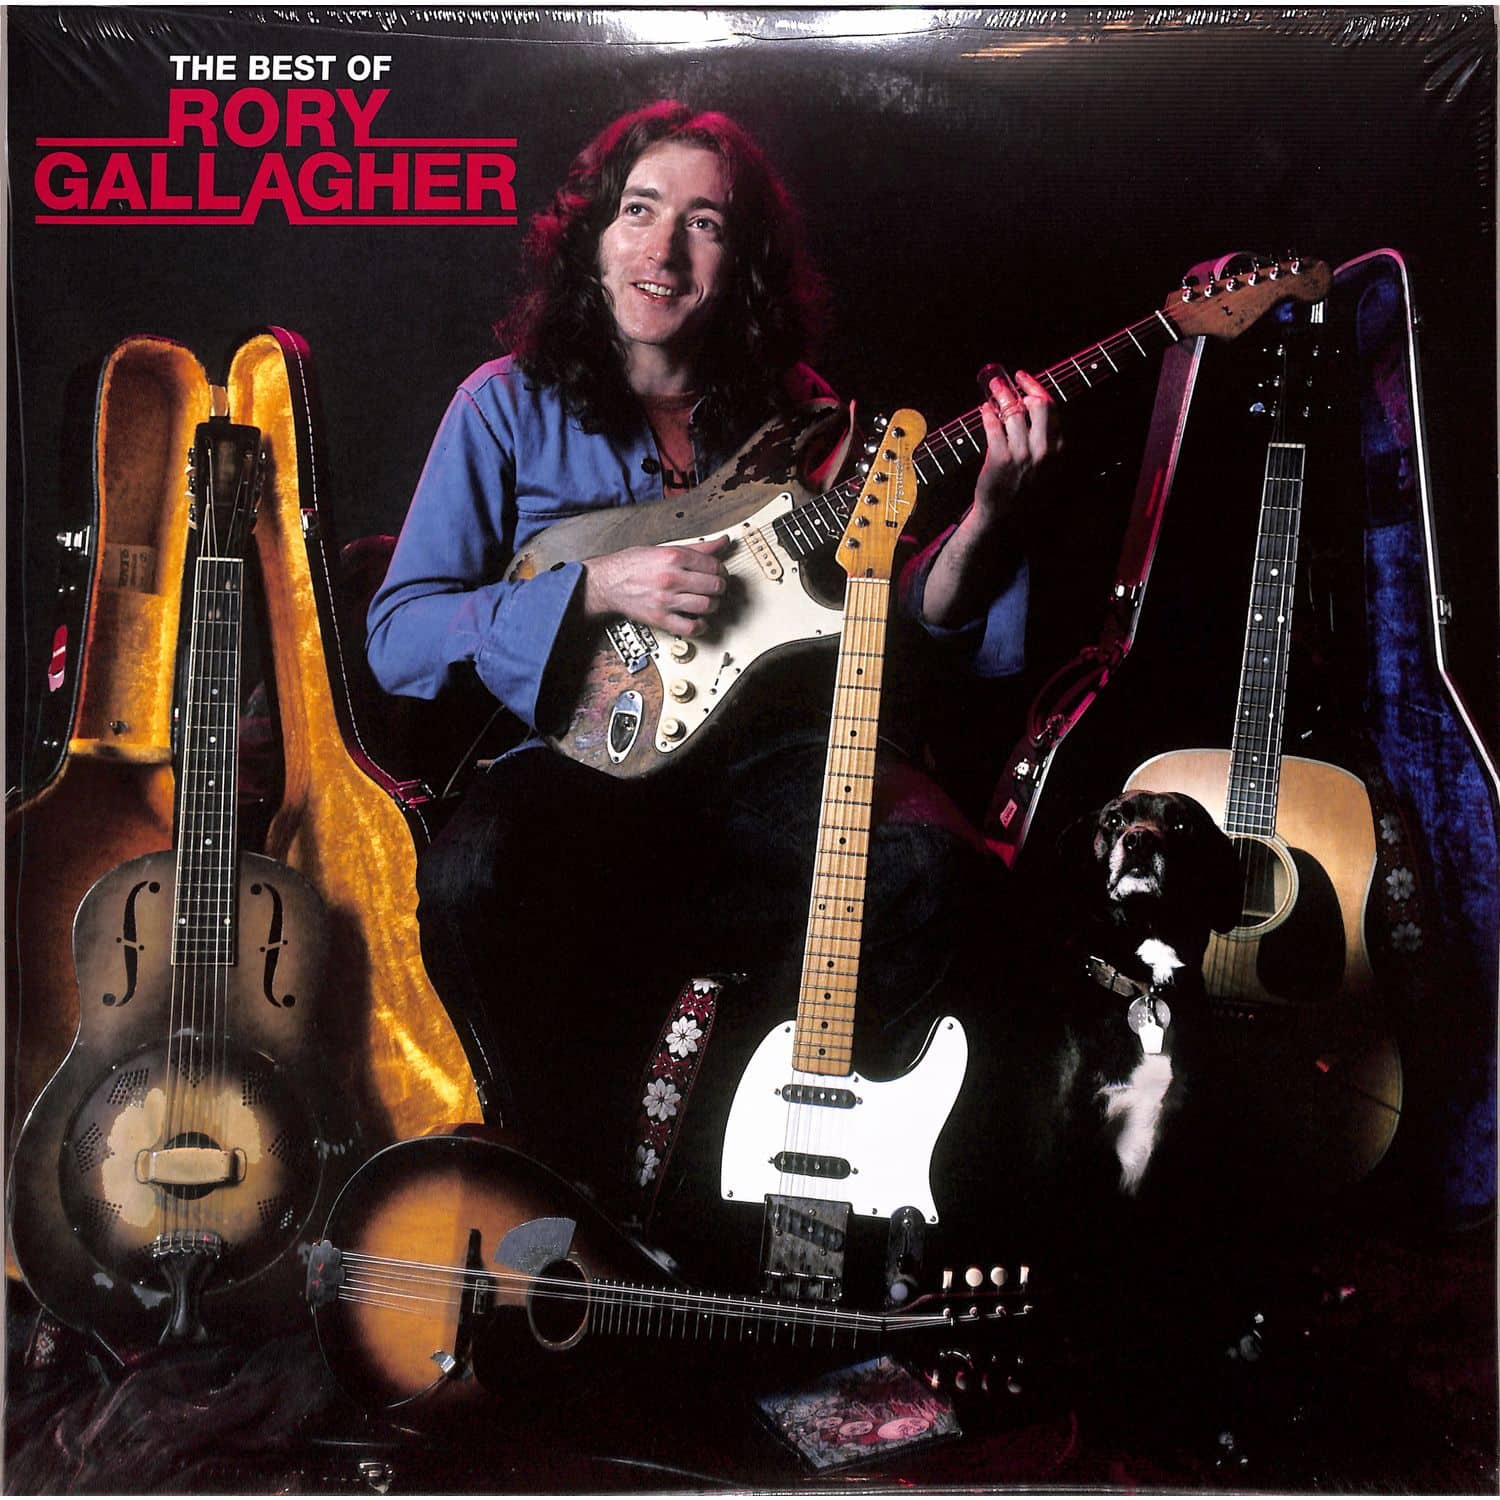 Rory Gallagher - THE BEST OF 